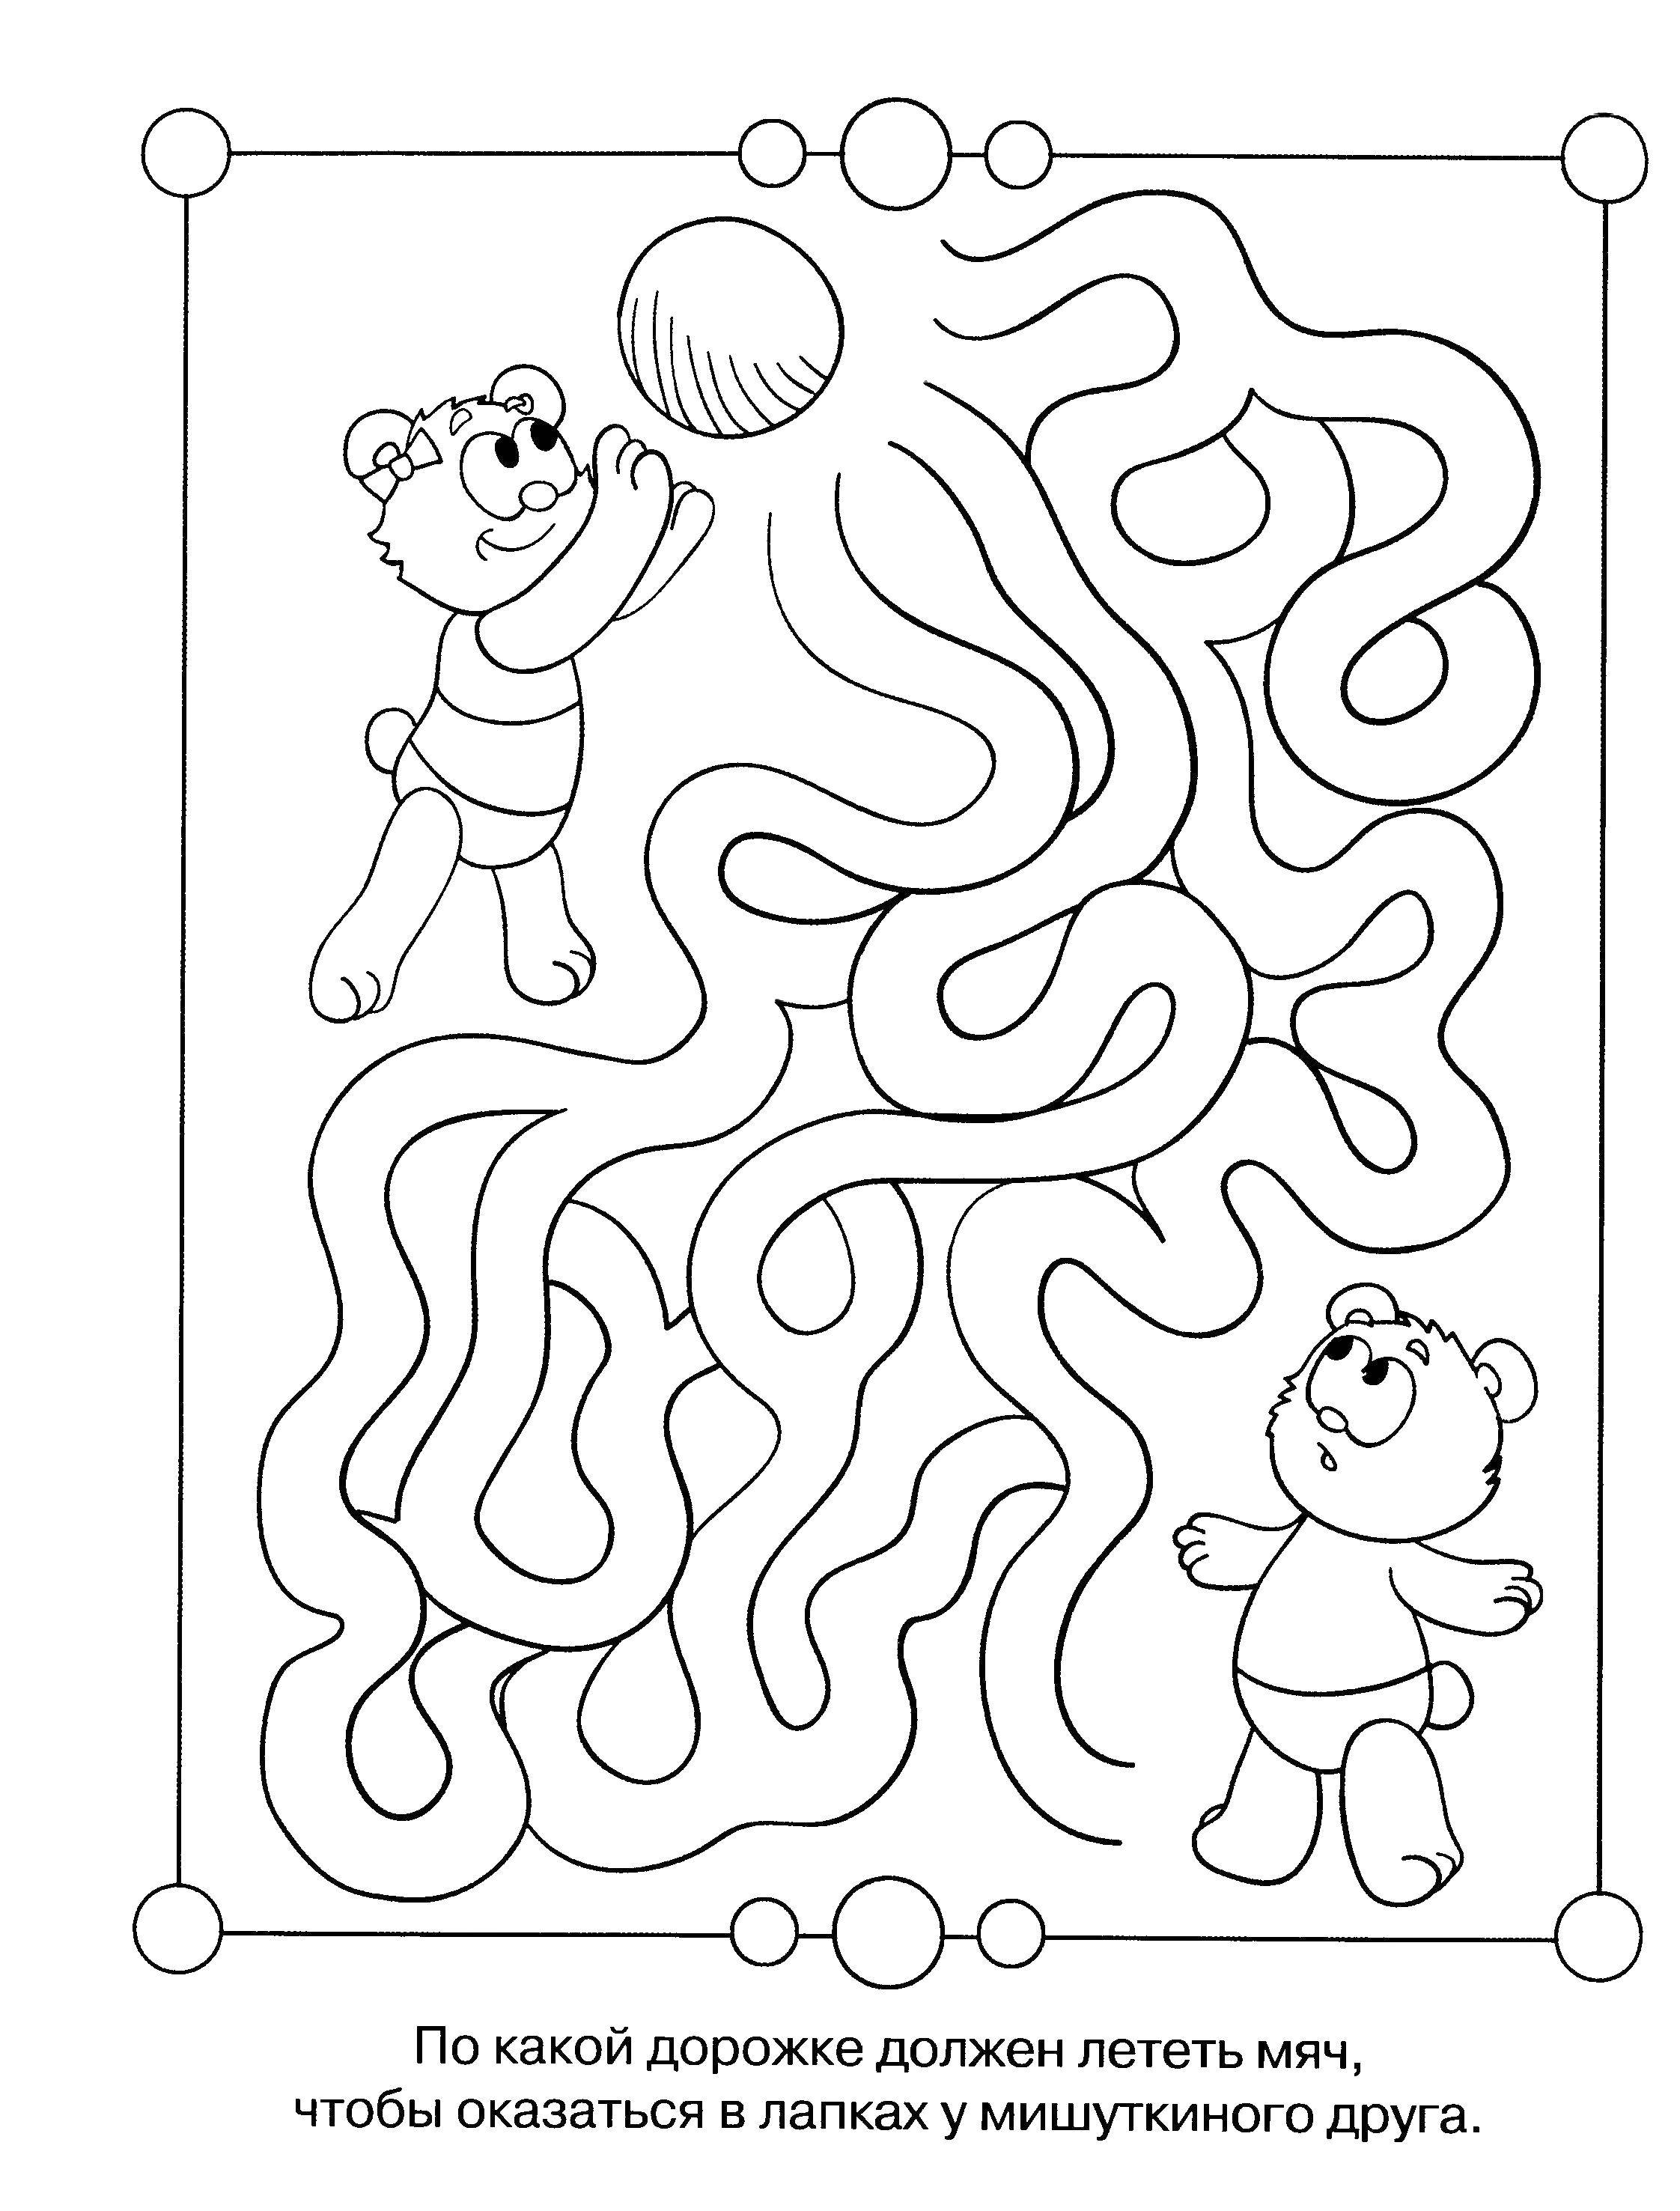 Coloring Maze bunch of Teddy bears. Category riddles for kids. Tags:  Maze, logic.